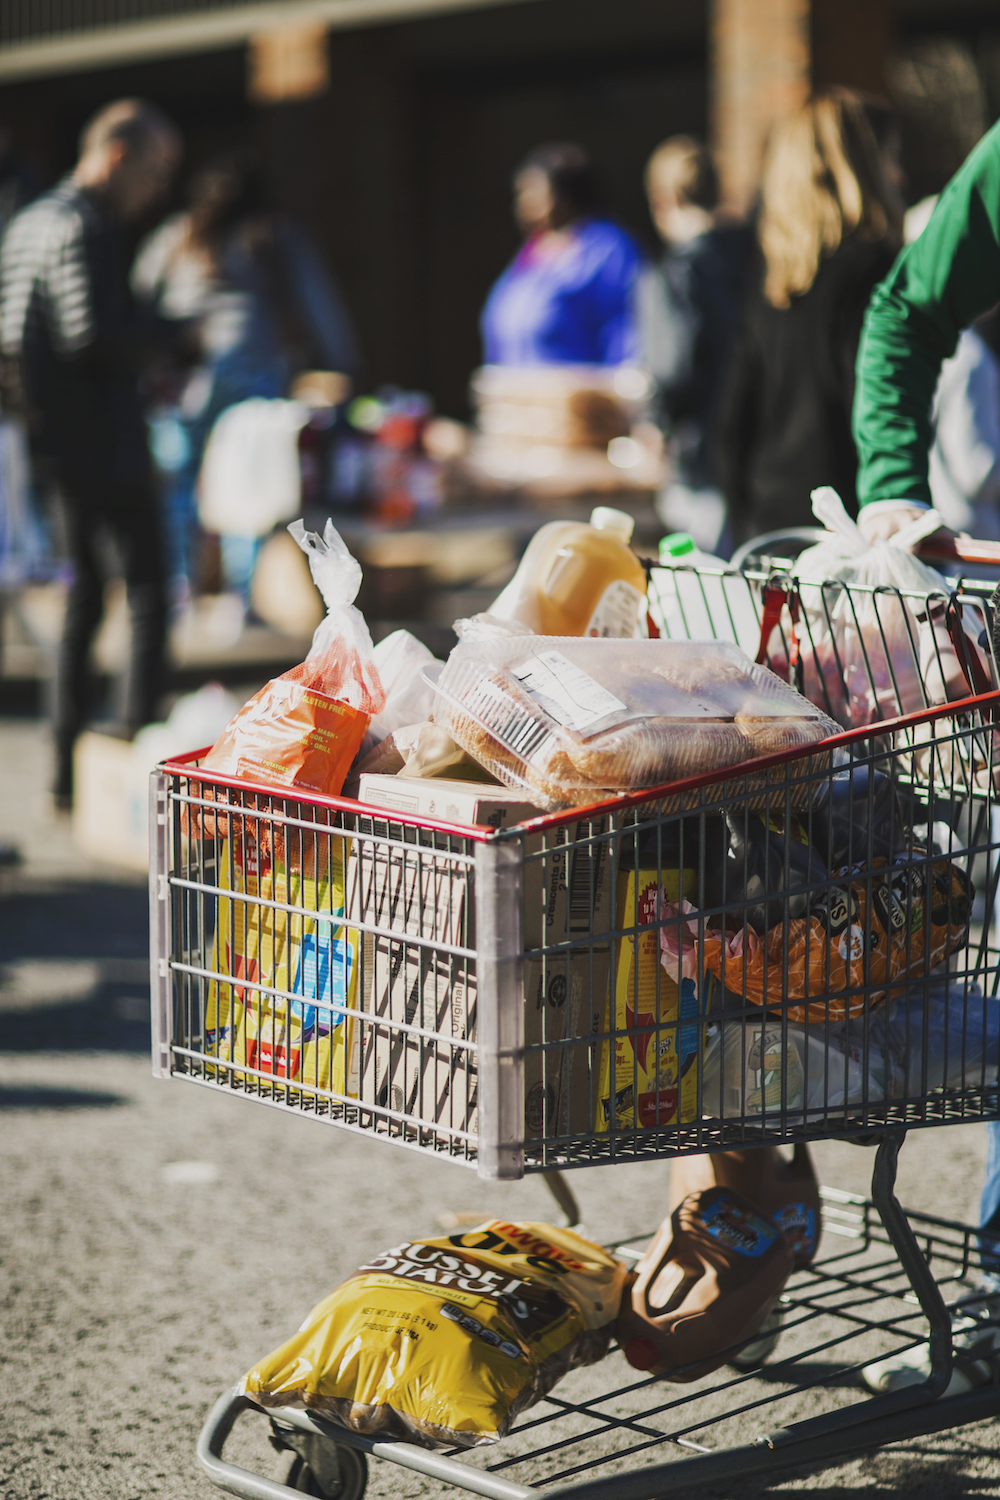 A person in a green long-sleeve shirt pushes a shopping cart full of assorted groceries